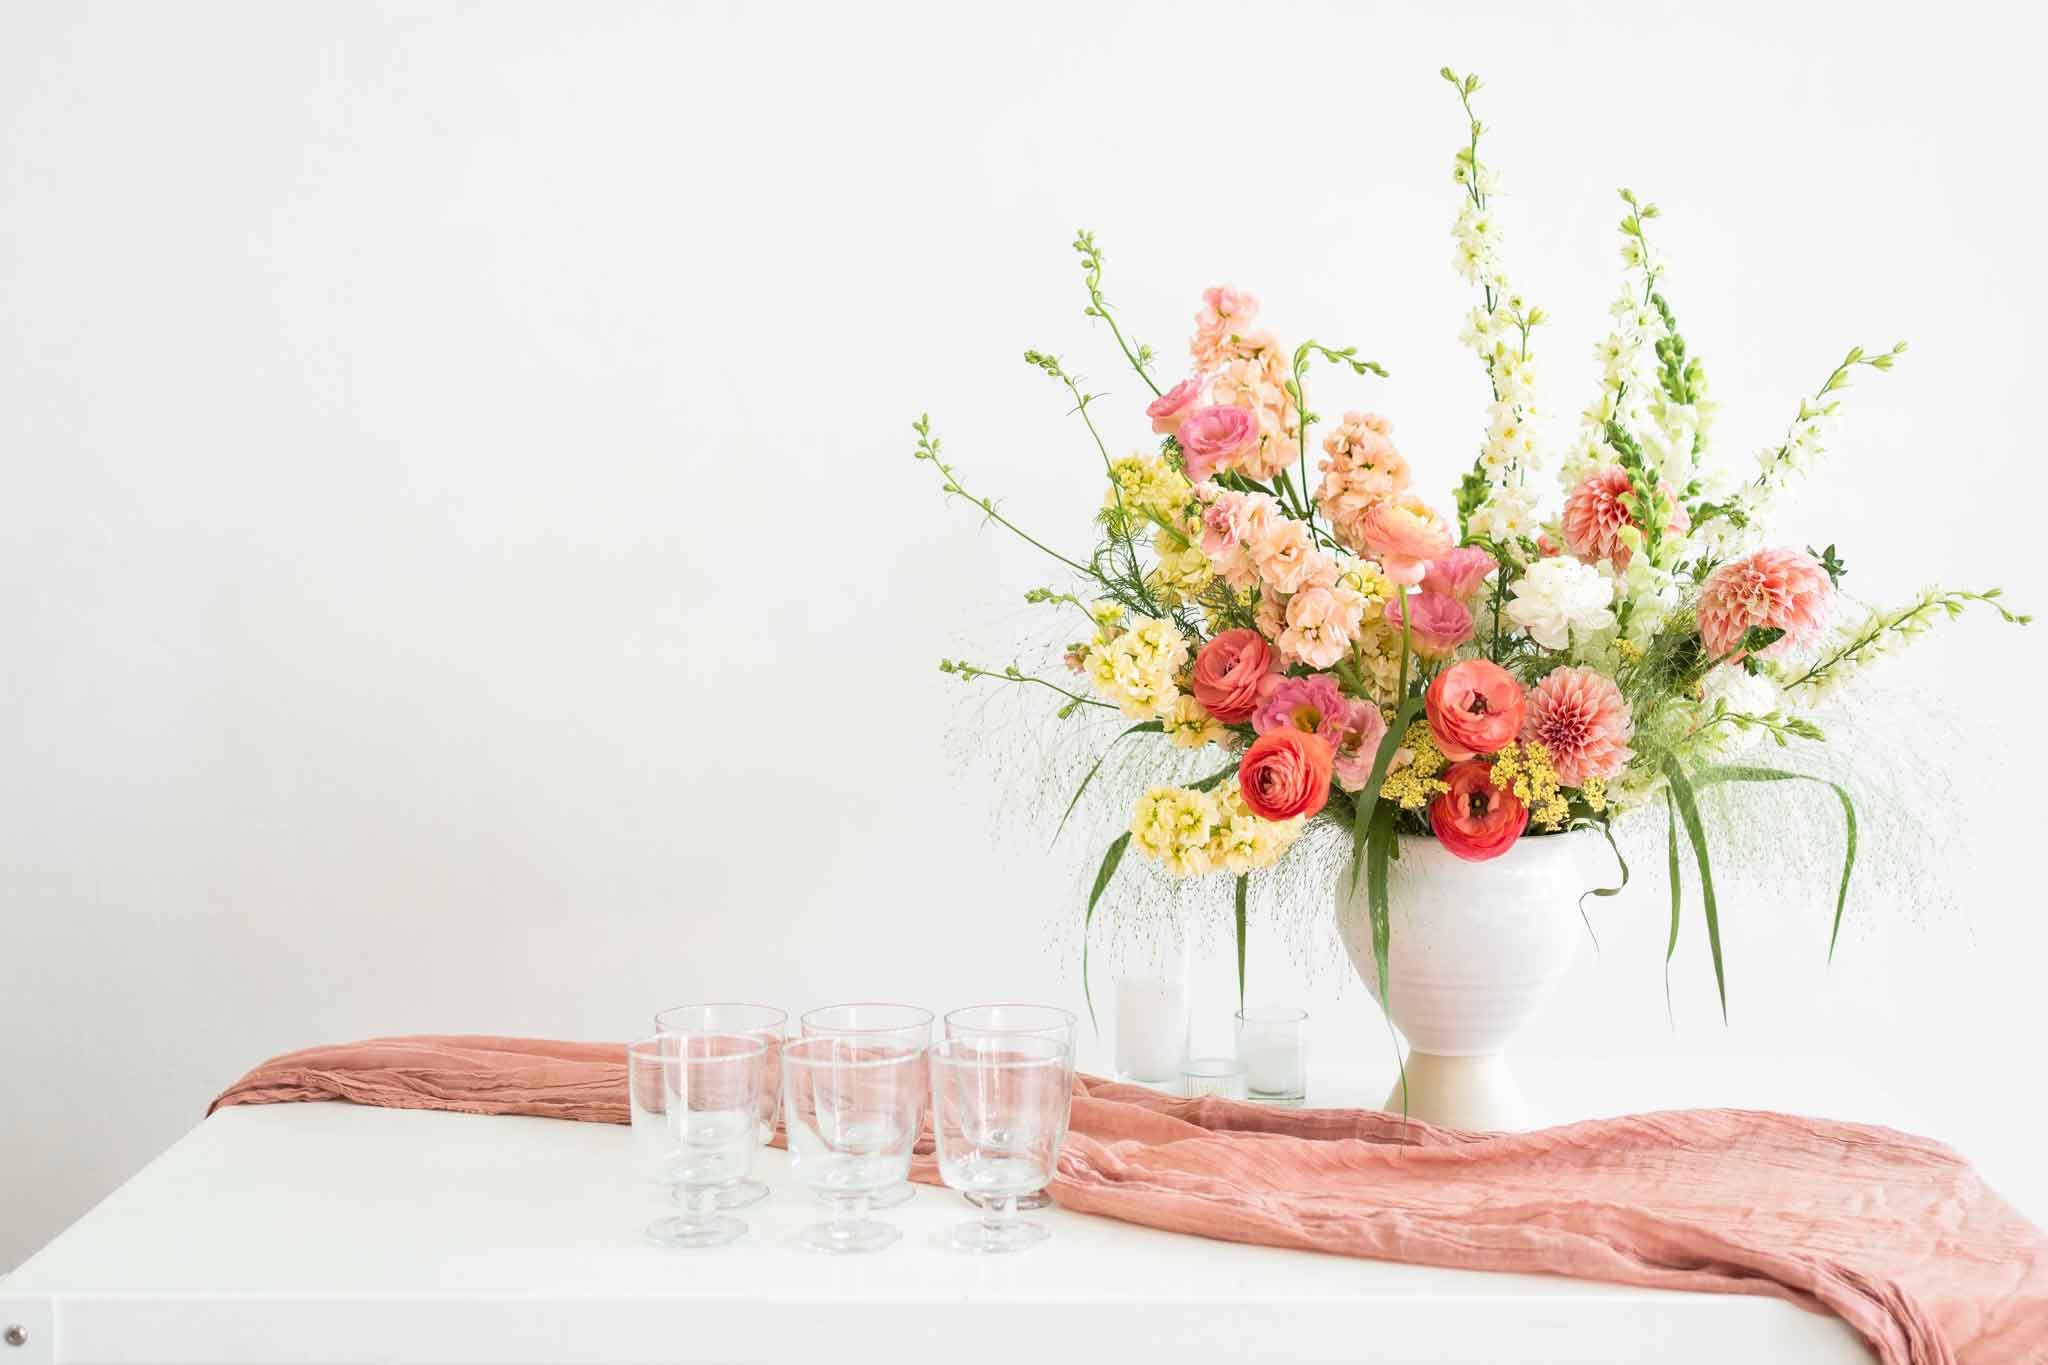 Tall Urn flower arrangement on a table with glassware and a pink sash